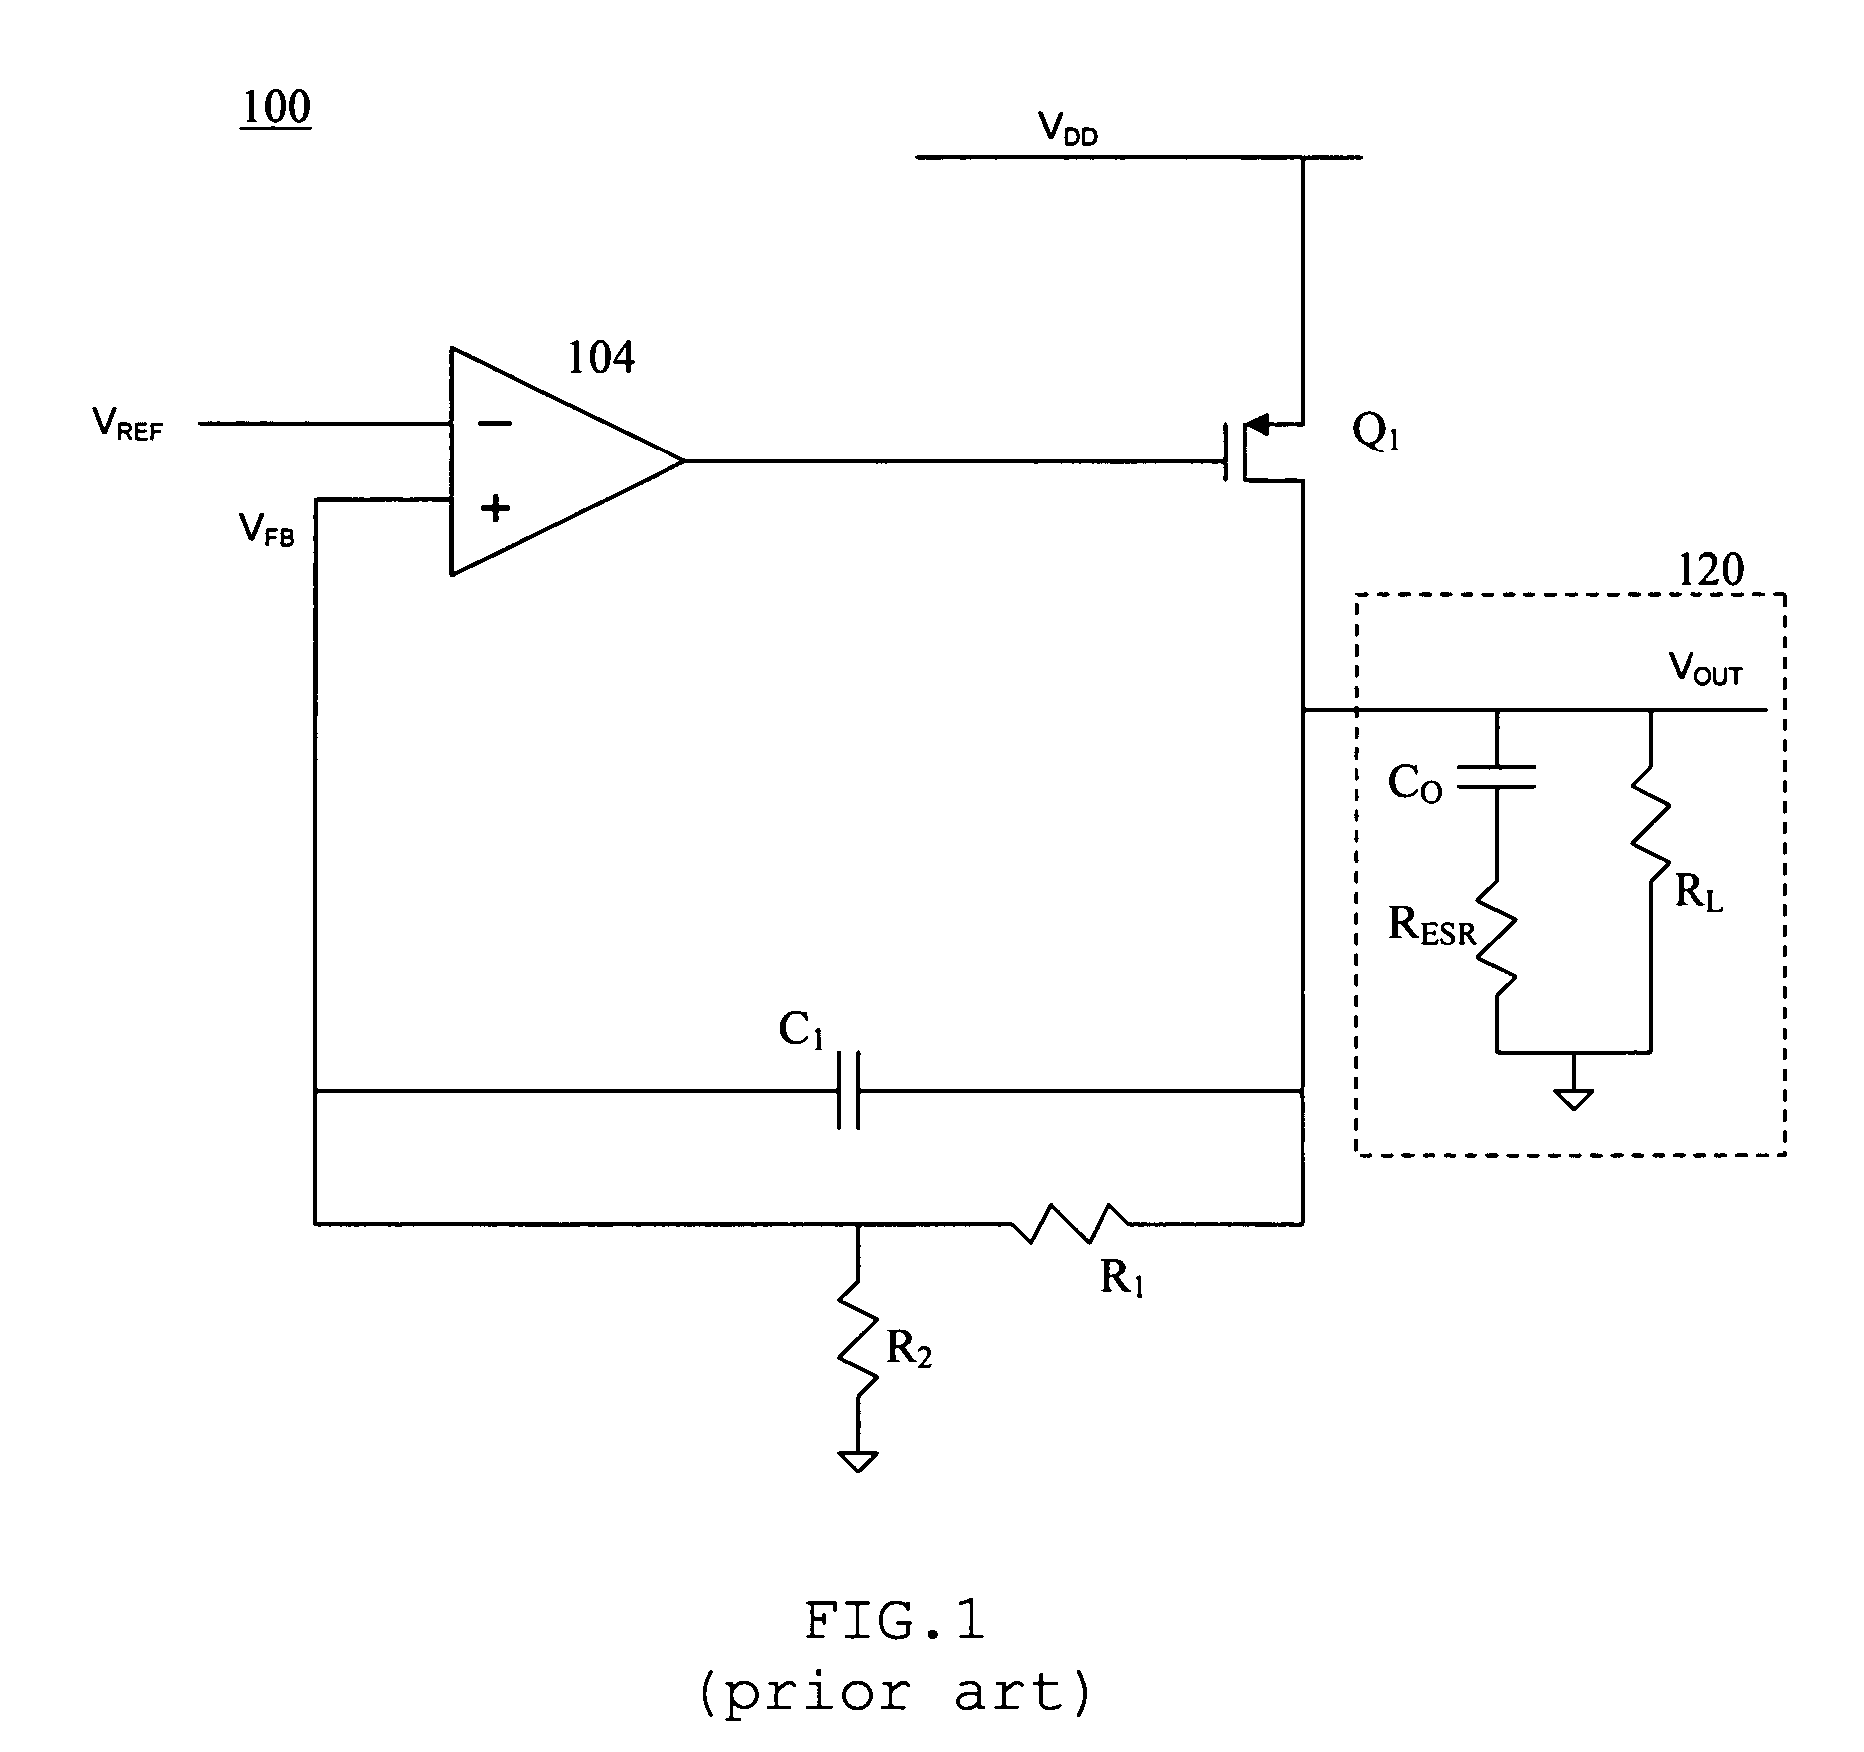 AC-coupled equivalent series resistance